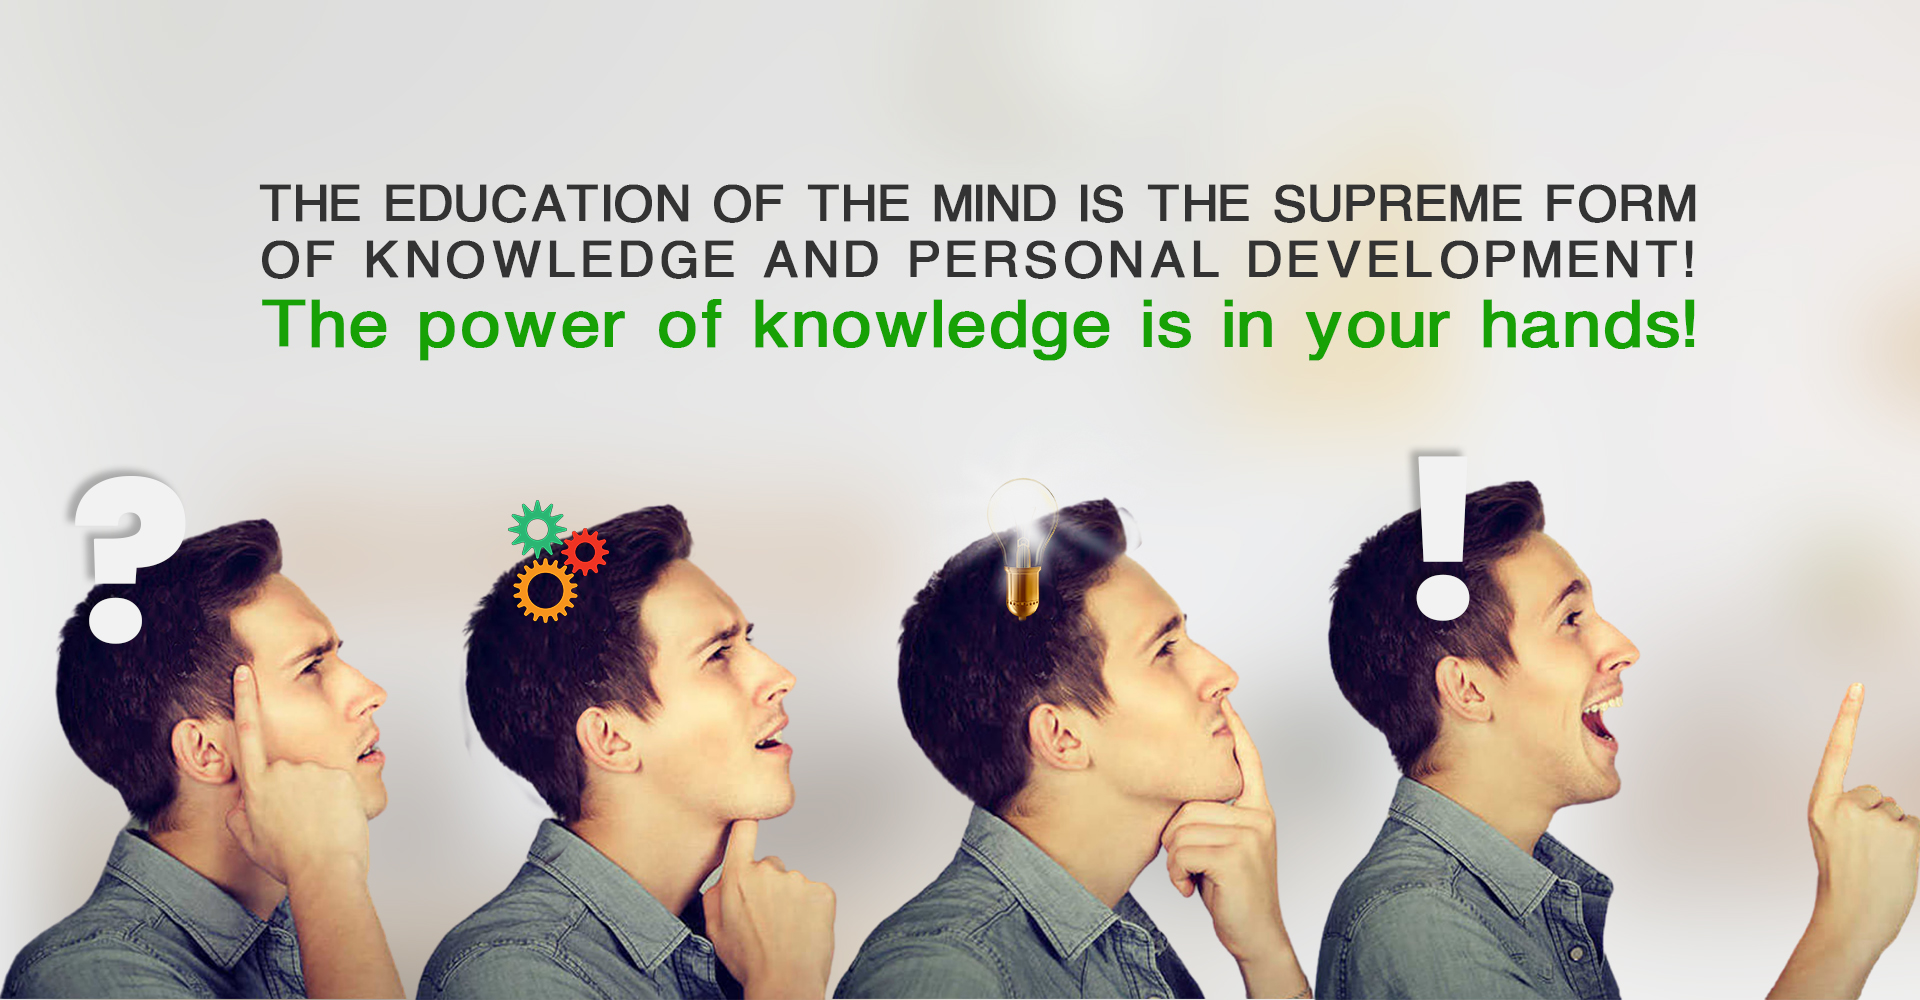 The education of the mind